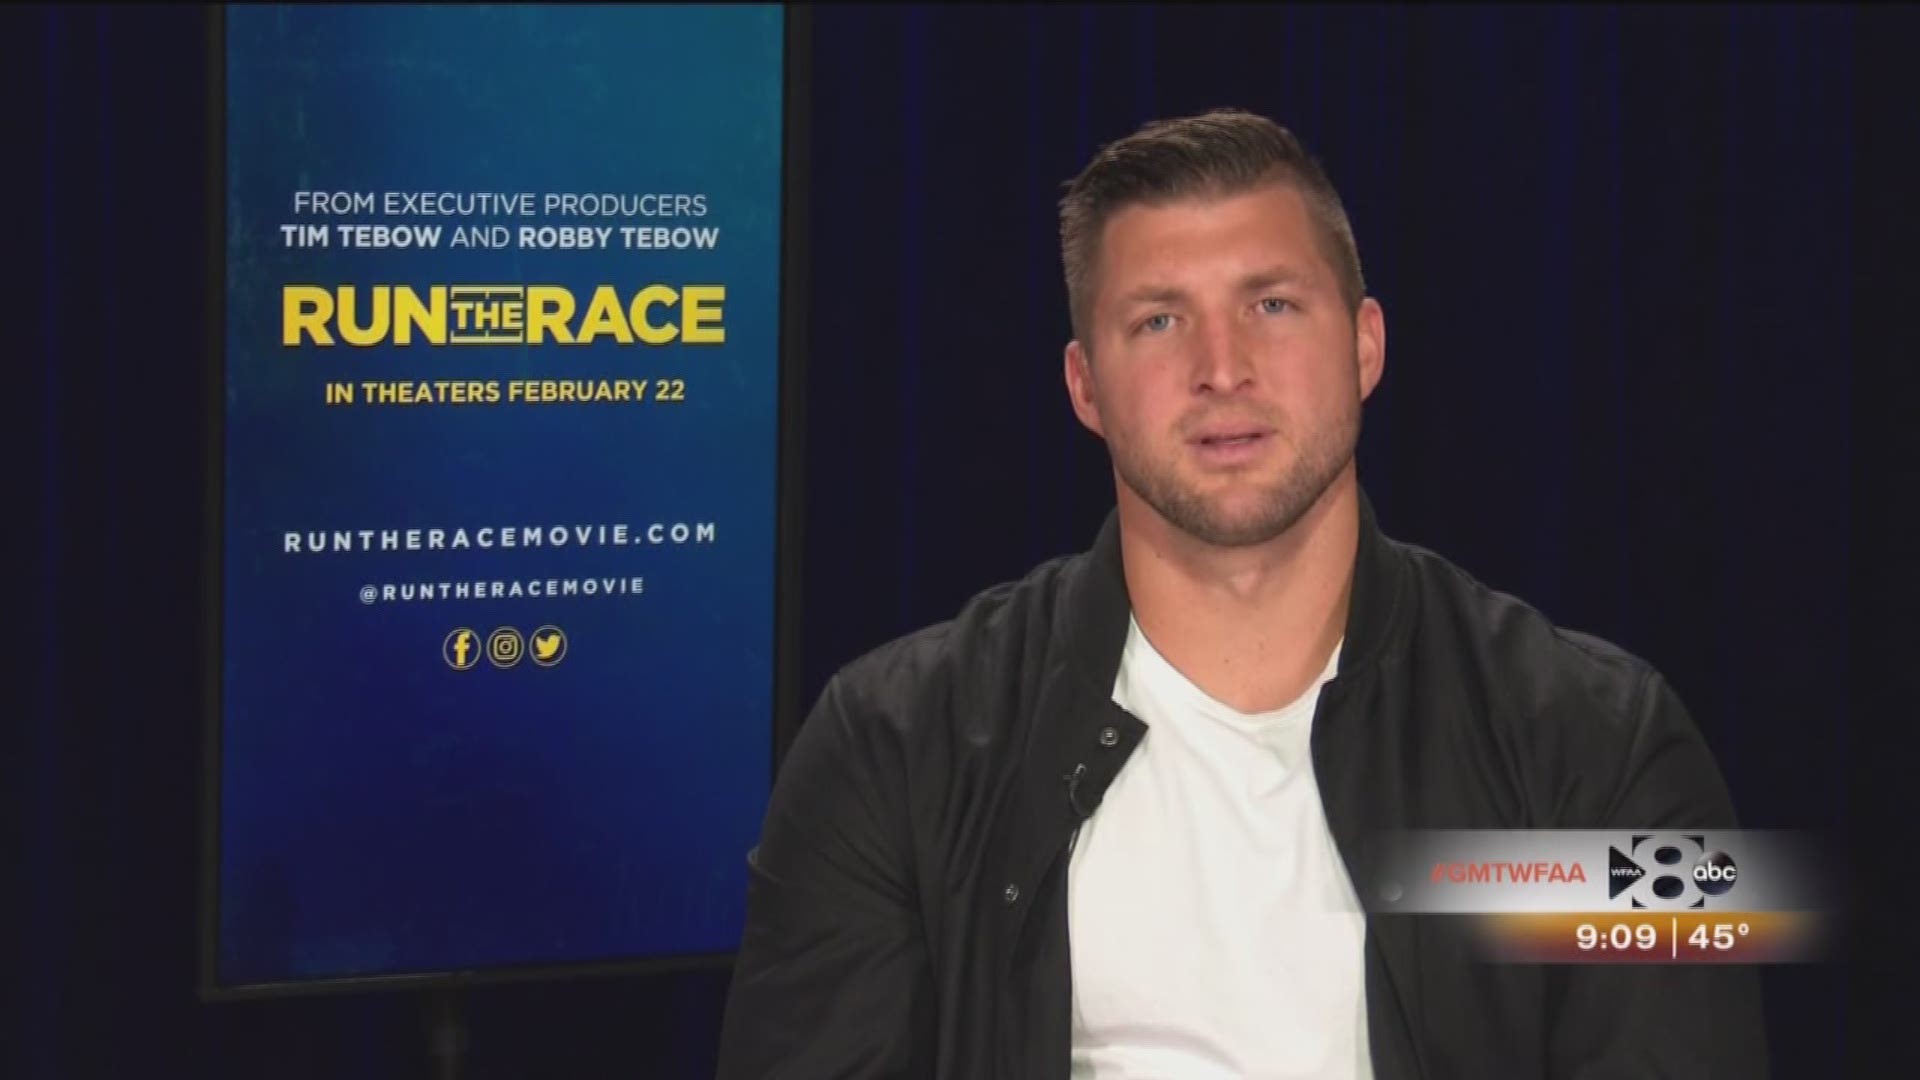 Tim Tebow talks about his new film Run the Race.